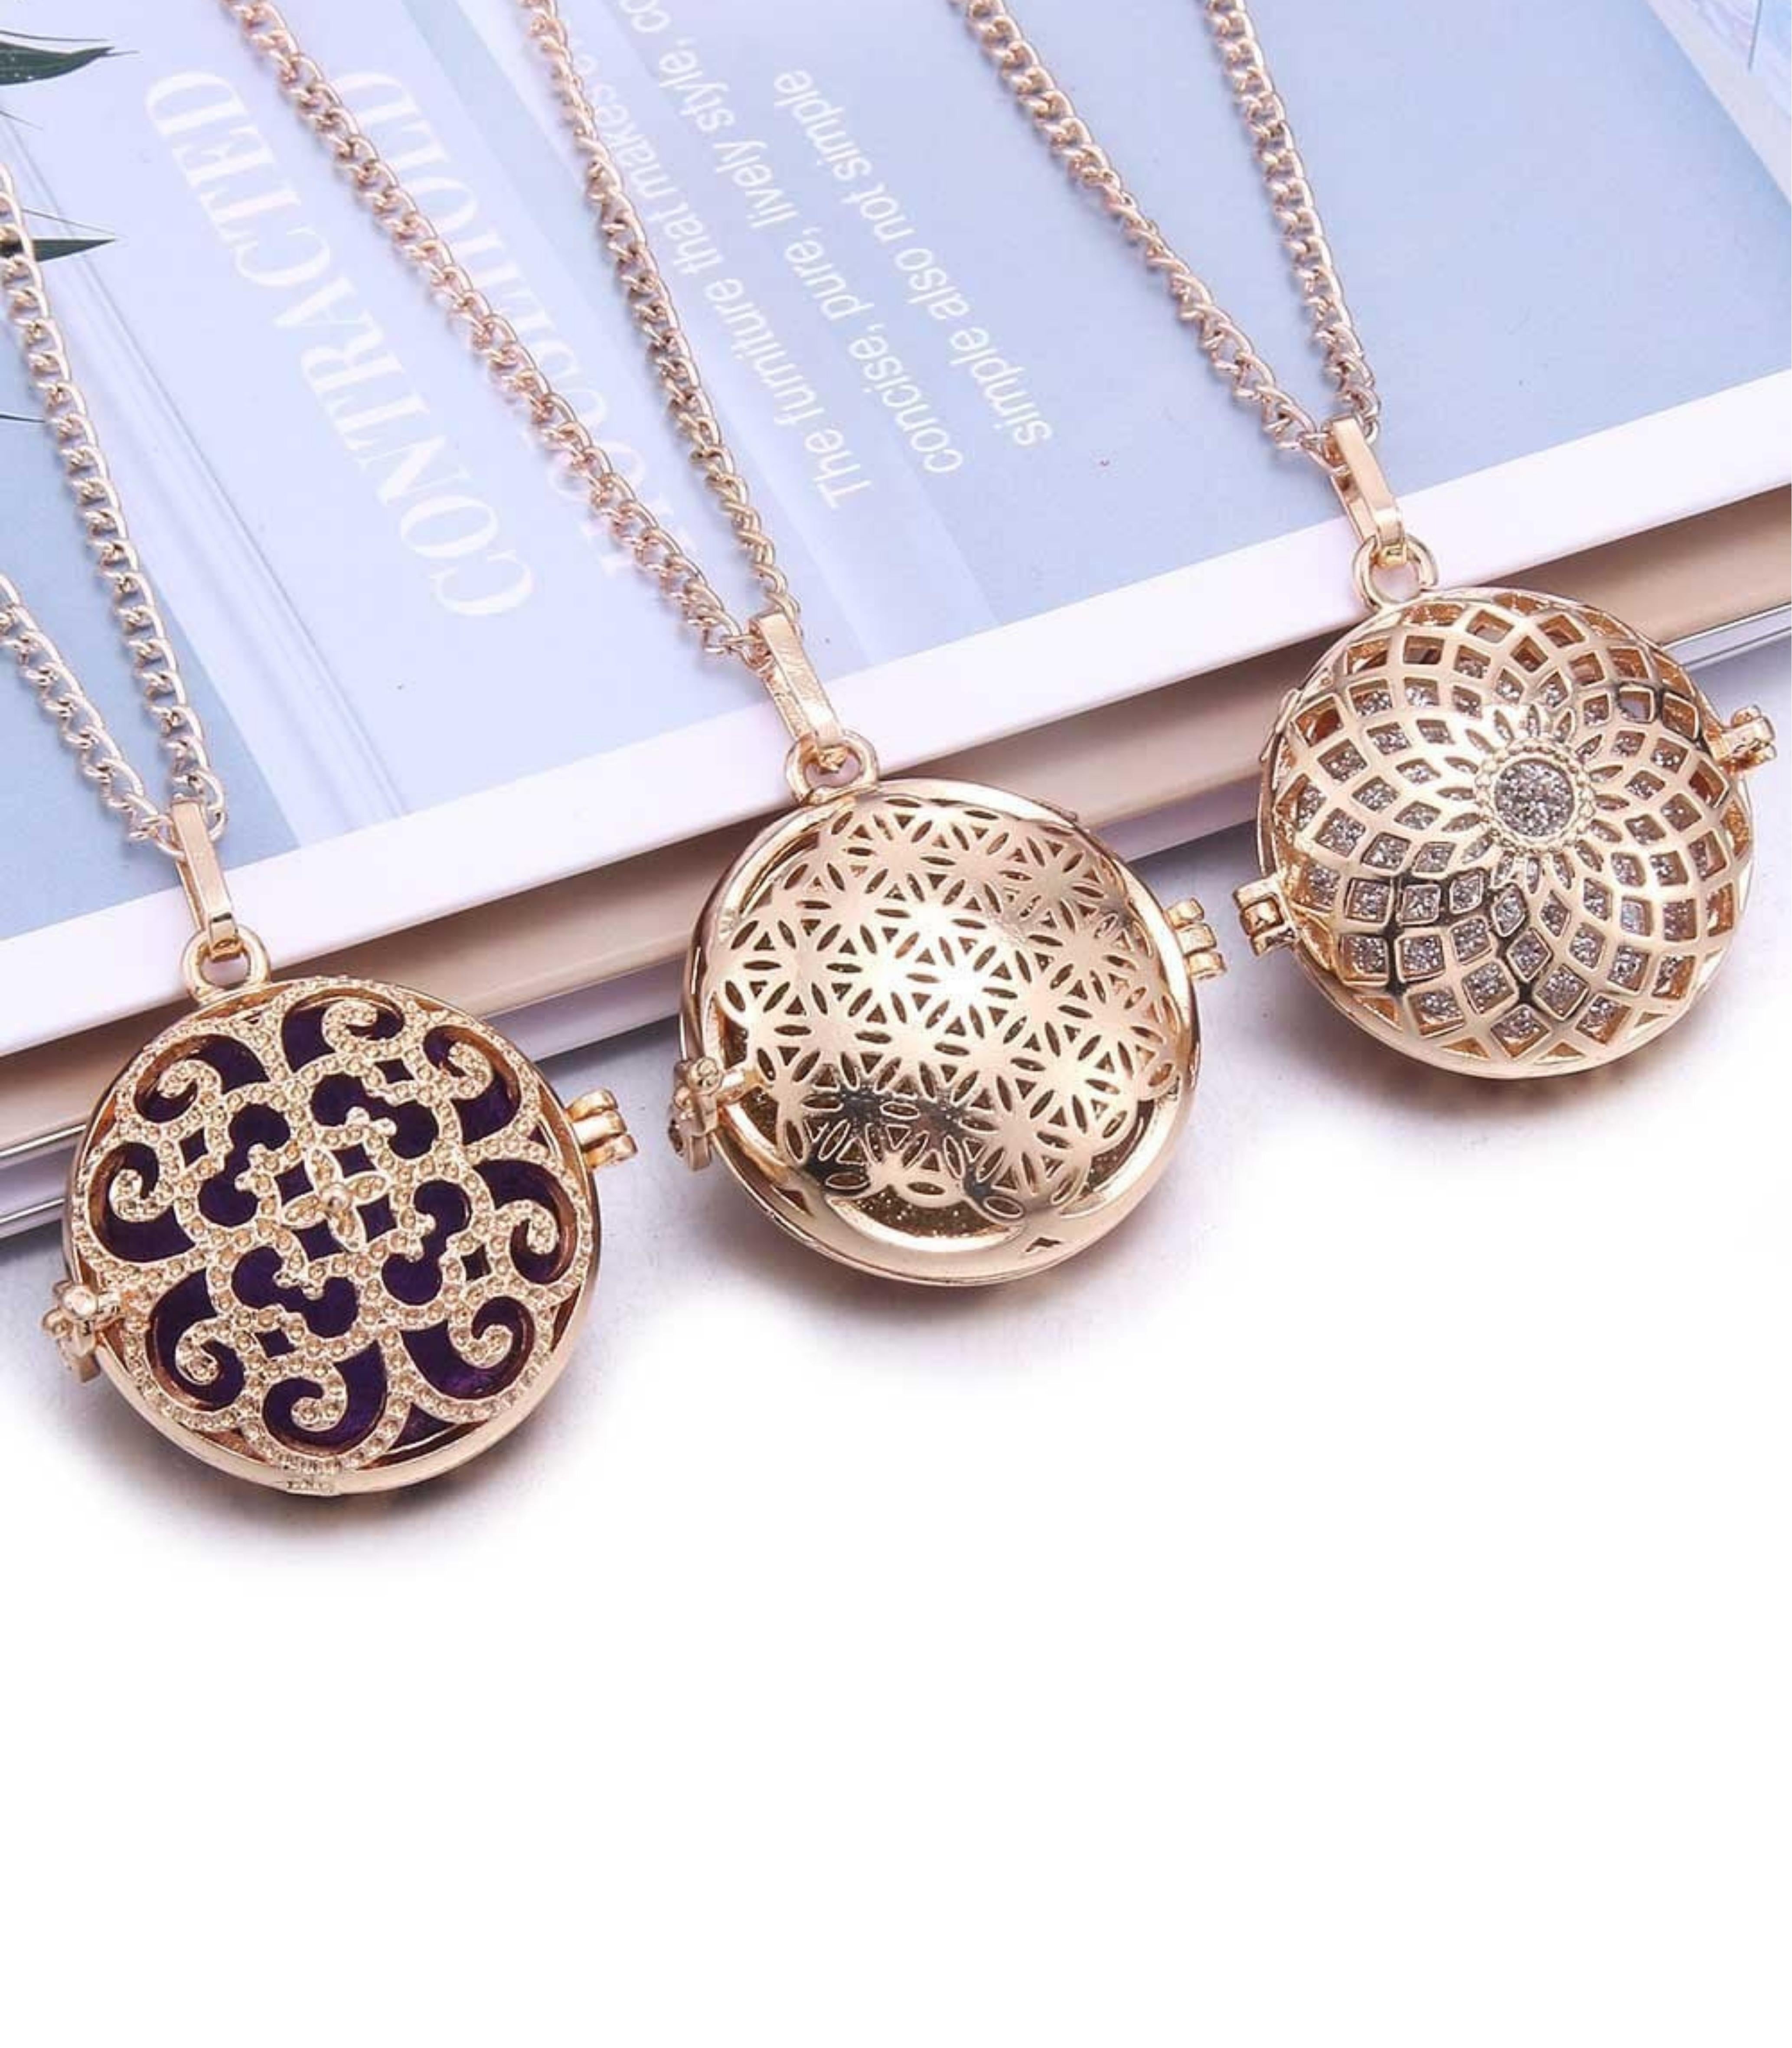 Stainless Steel Aromatherapy Pendant Necklace with Assorted Diffuser Felt Pads Hamsa Essential Oil Diffuser Locket Necklace 